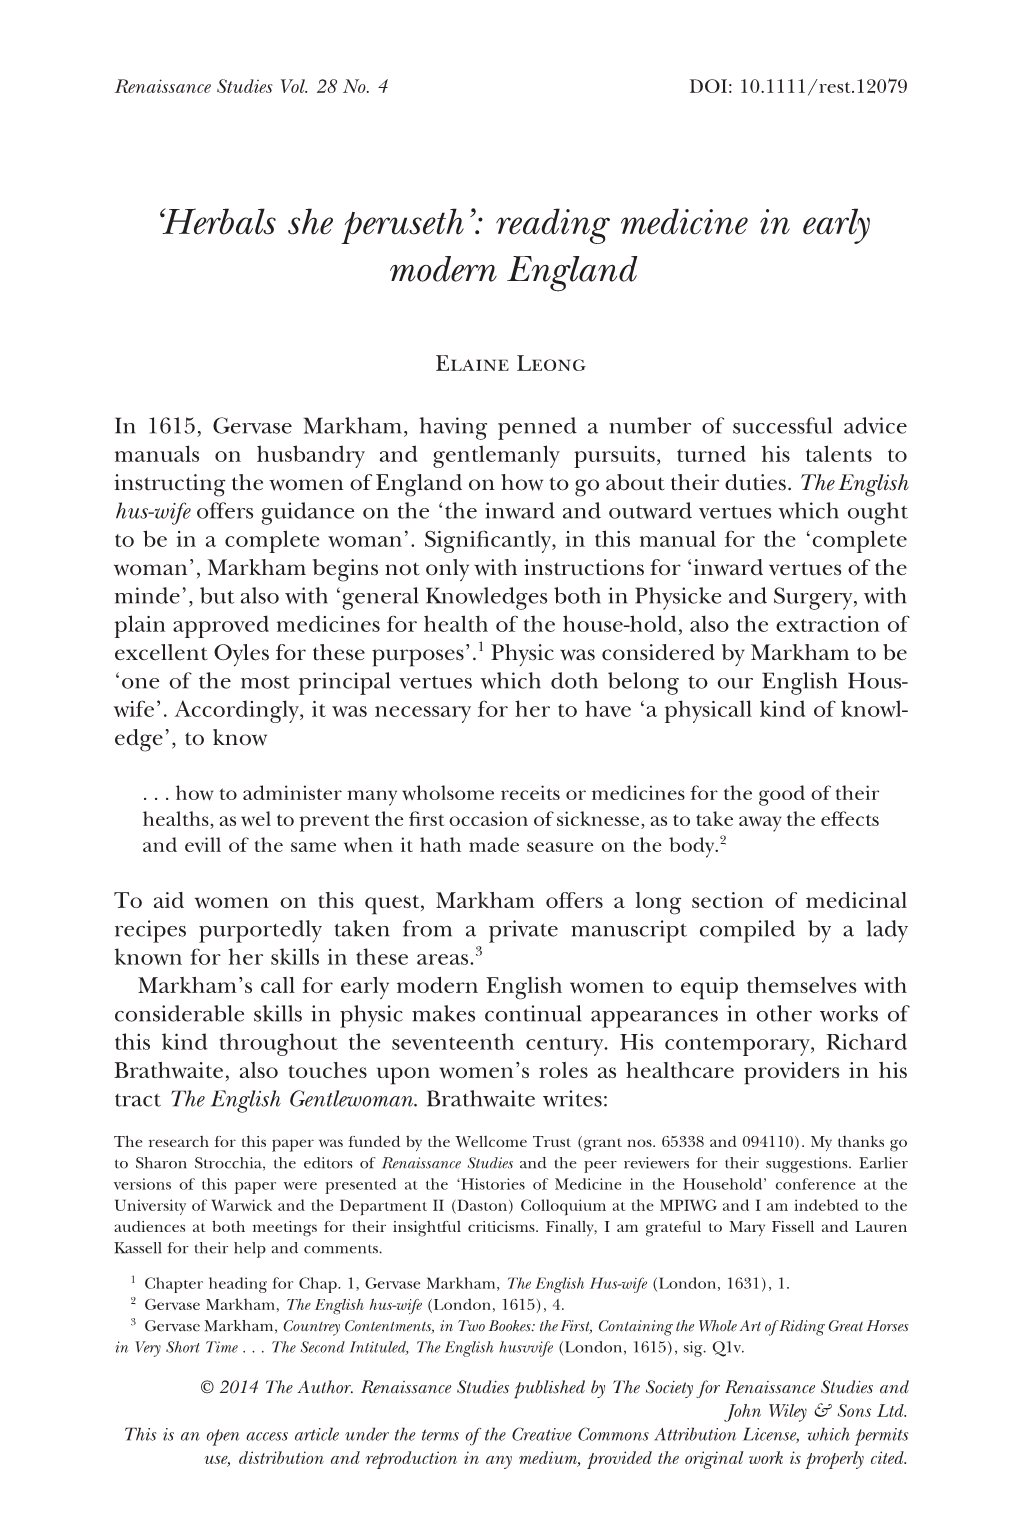 Reading Medicine in Early Modern England